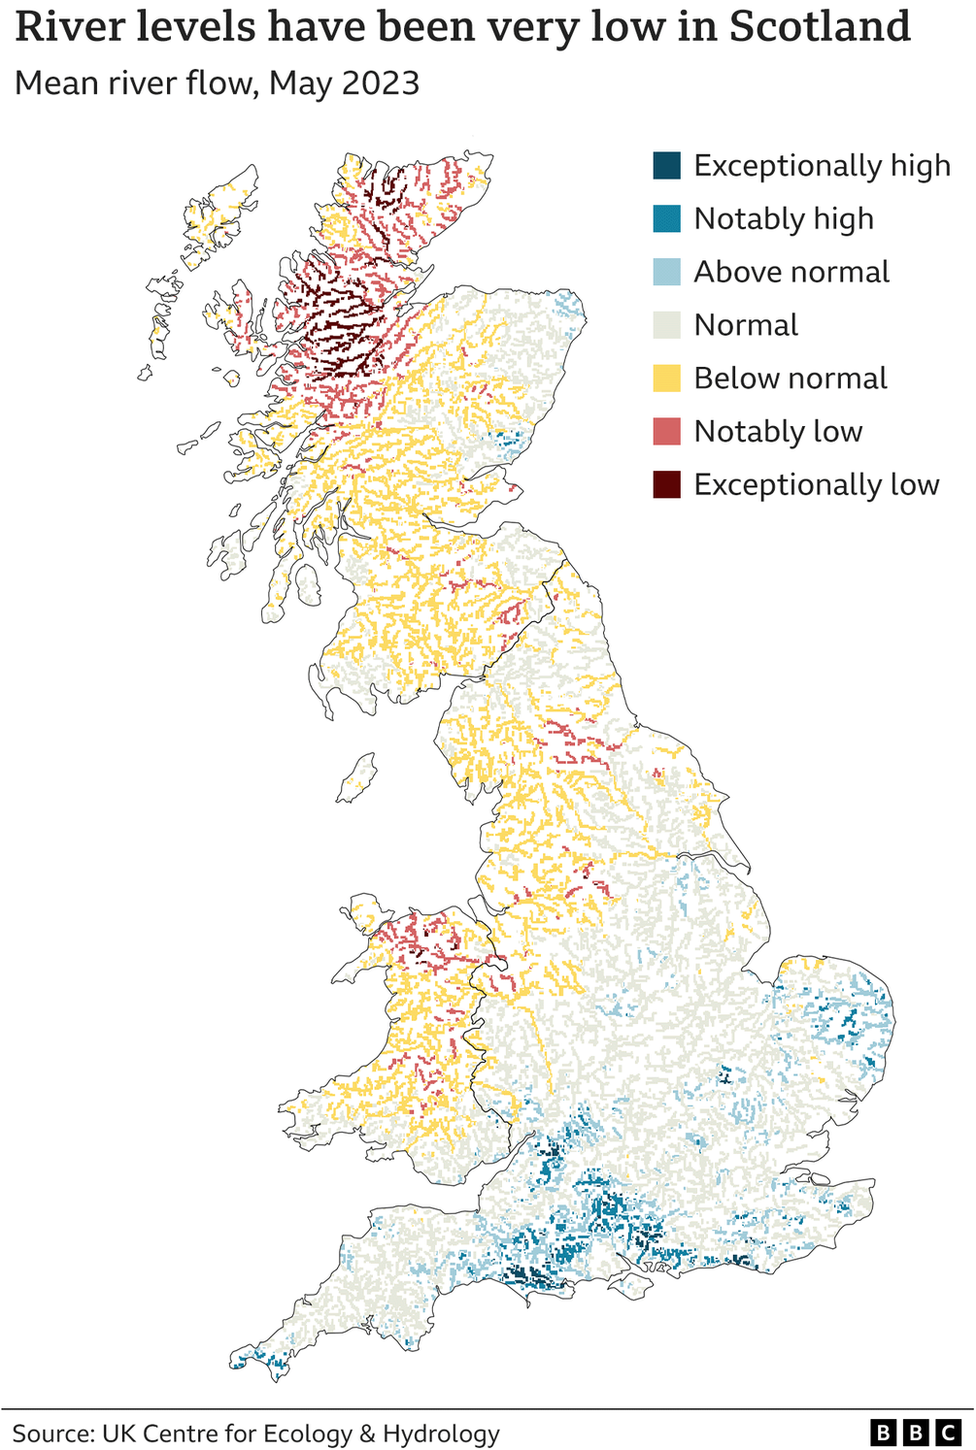 Map showing that river flows were very low in Scotland in May, compared to higher river flows in the south of England